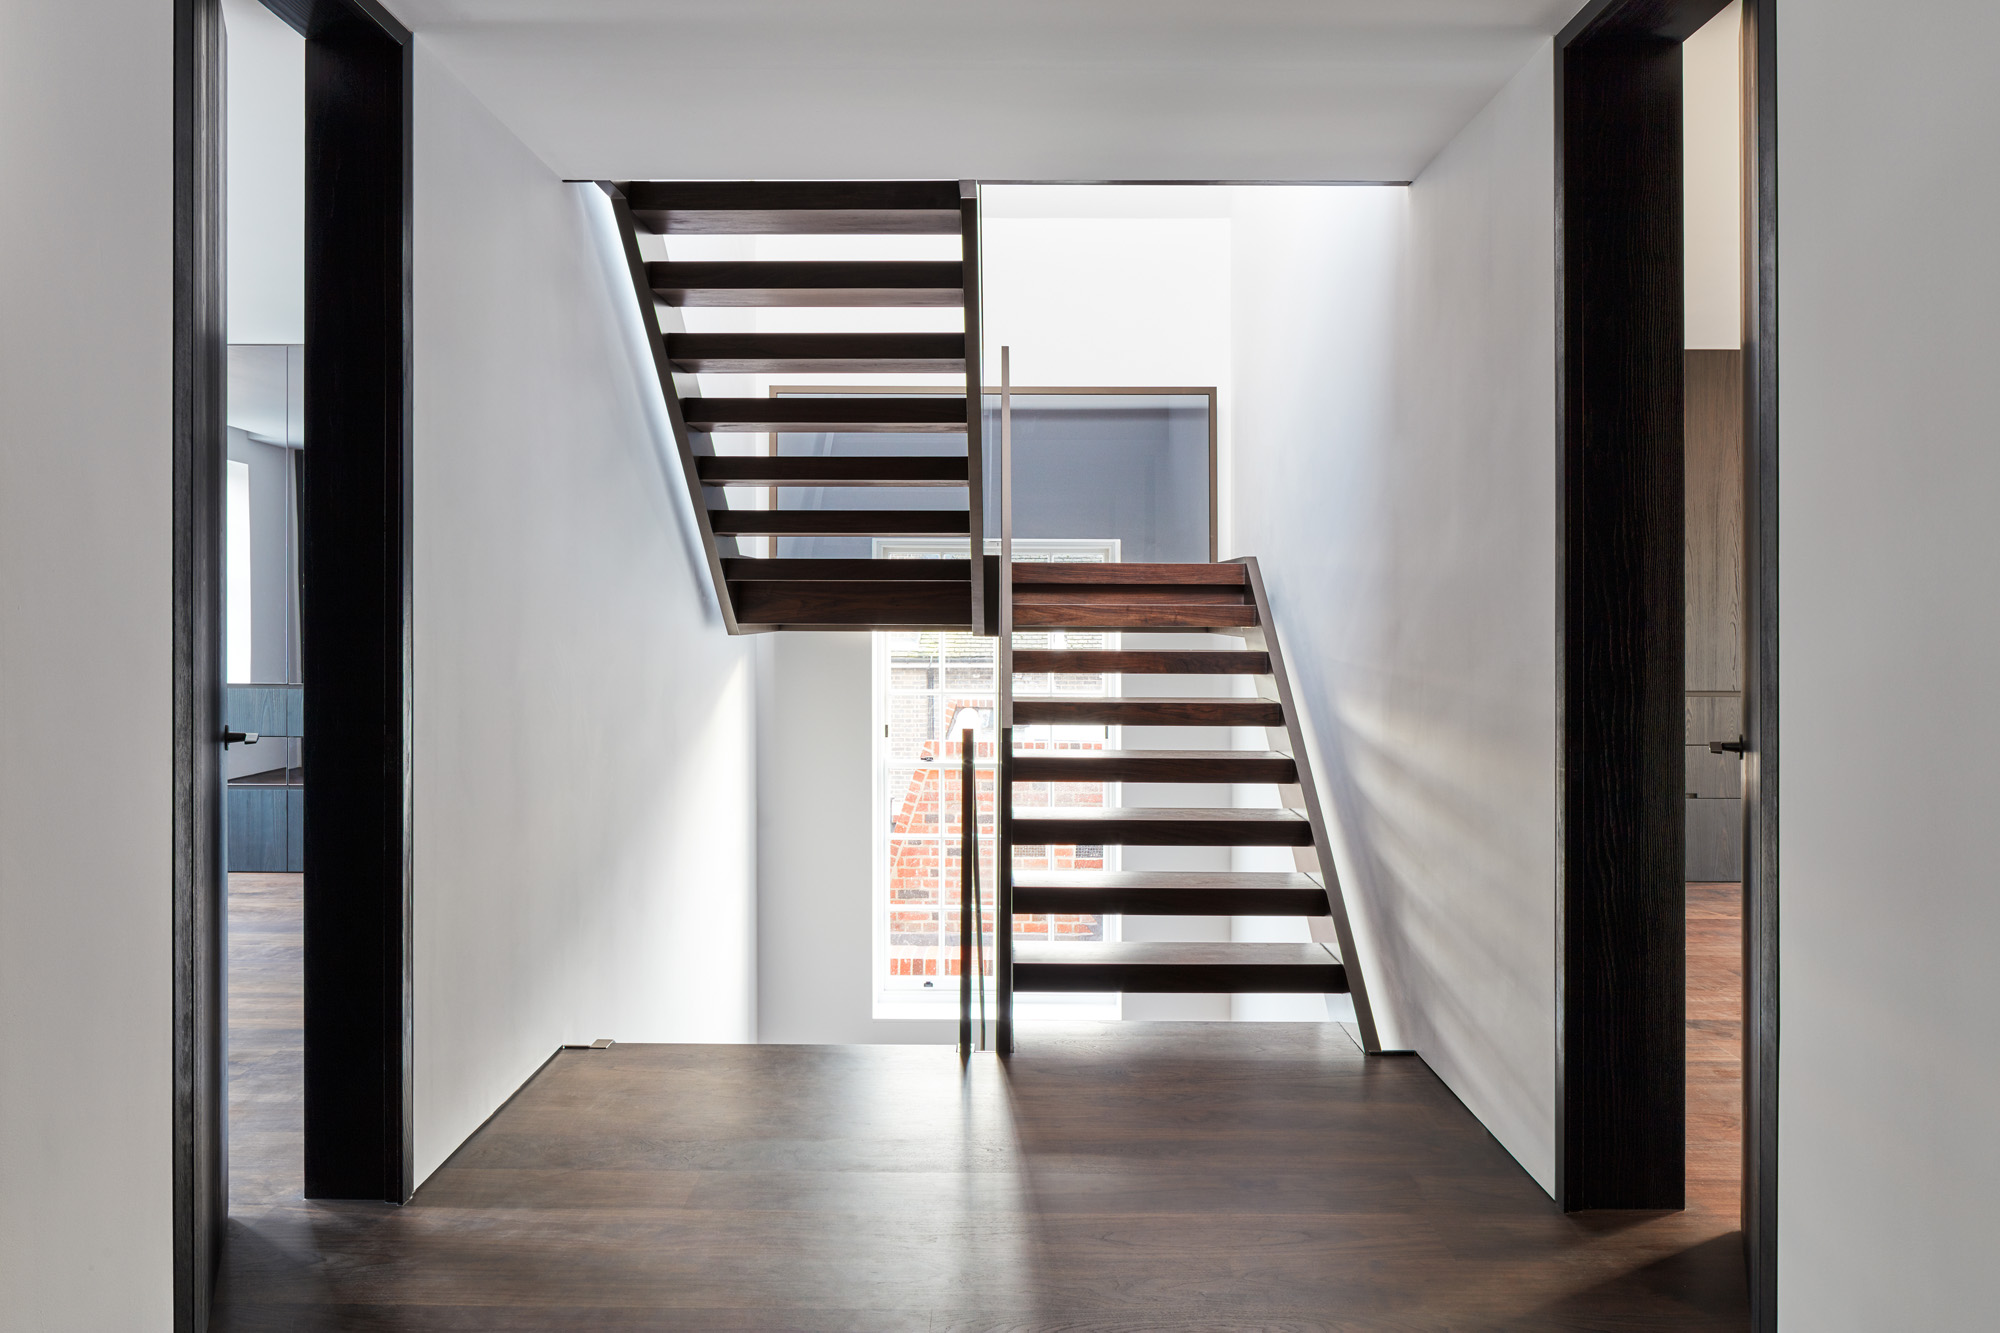 Slatted stairs connect floors in a modern house